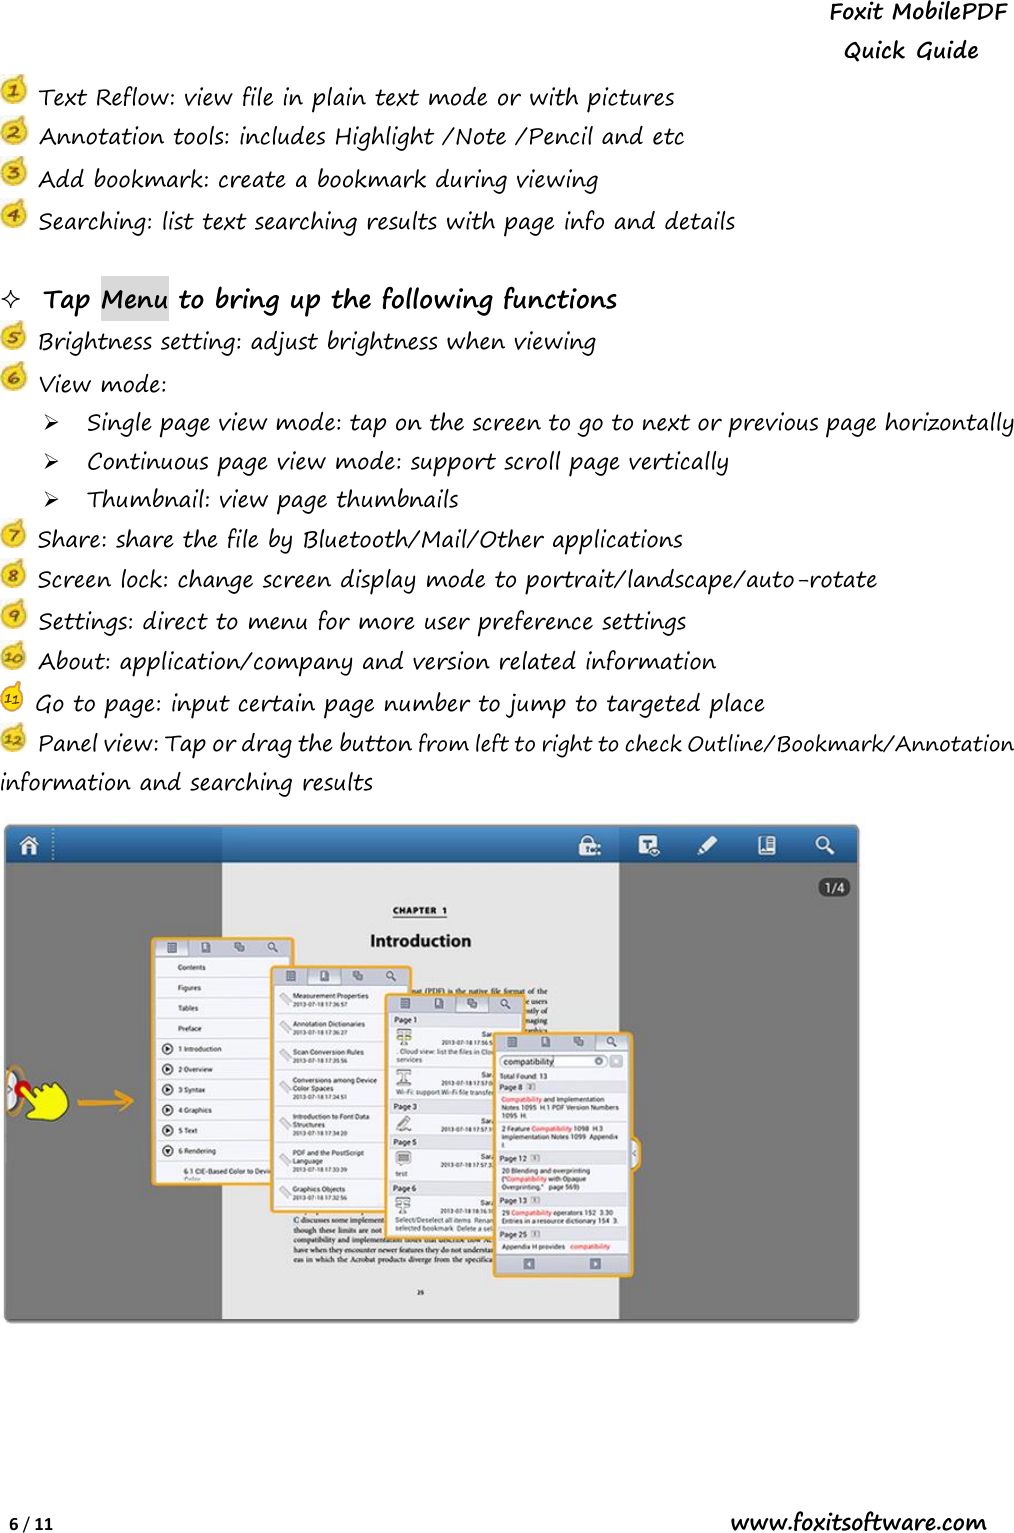 Page 6 of 11 - Foxit  Mobile PDF With RMS For Android - Quick Guide PDFWith RMSfor Um En